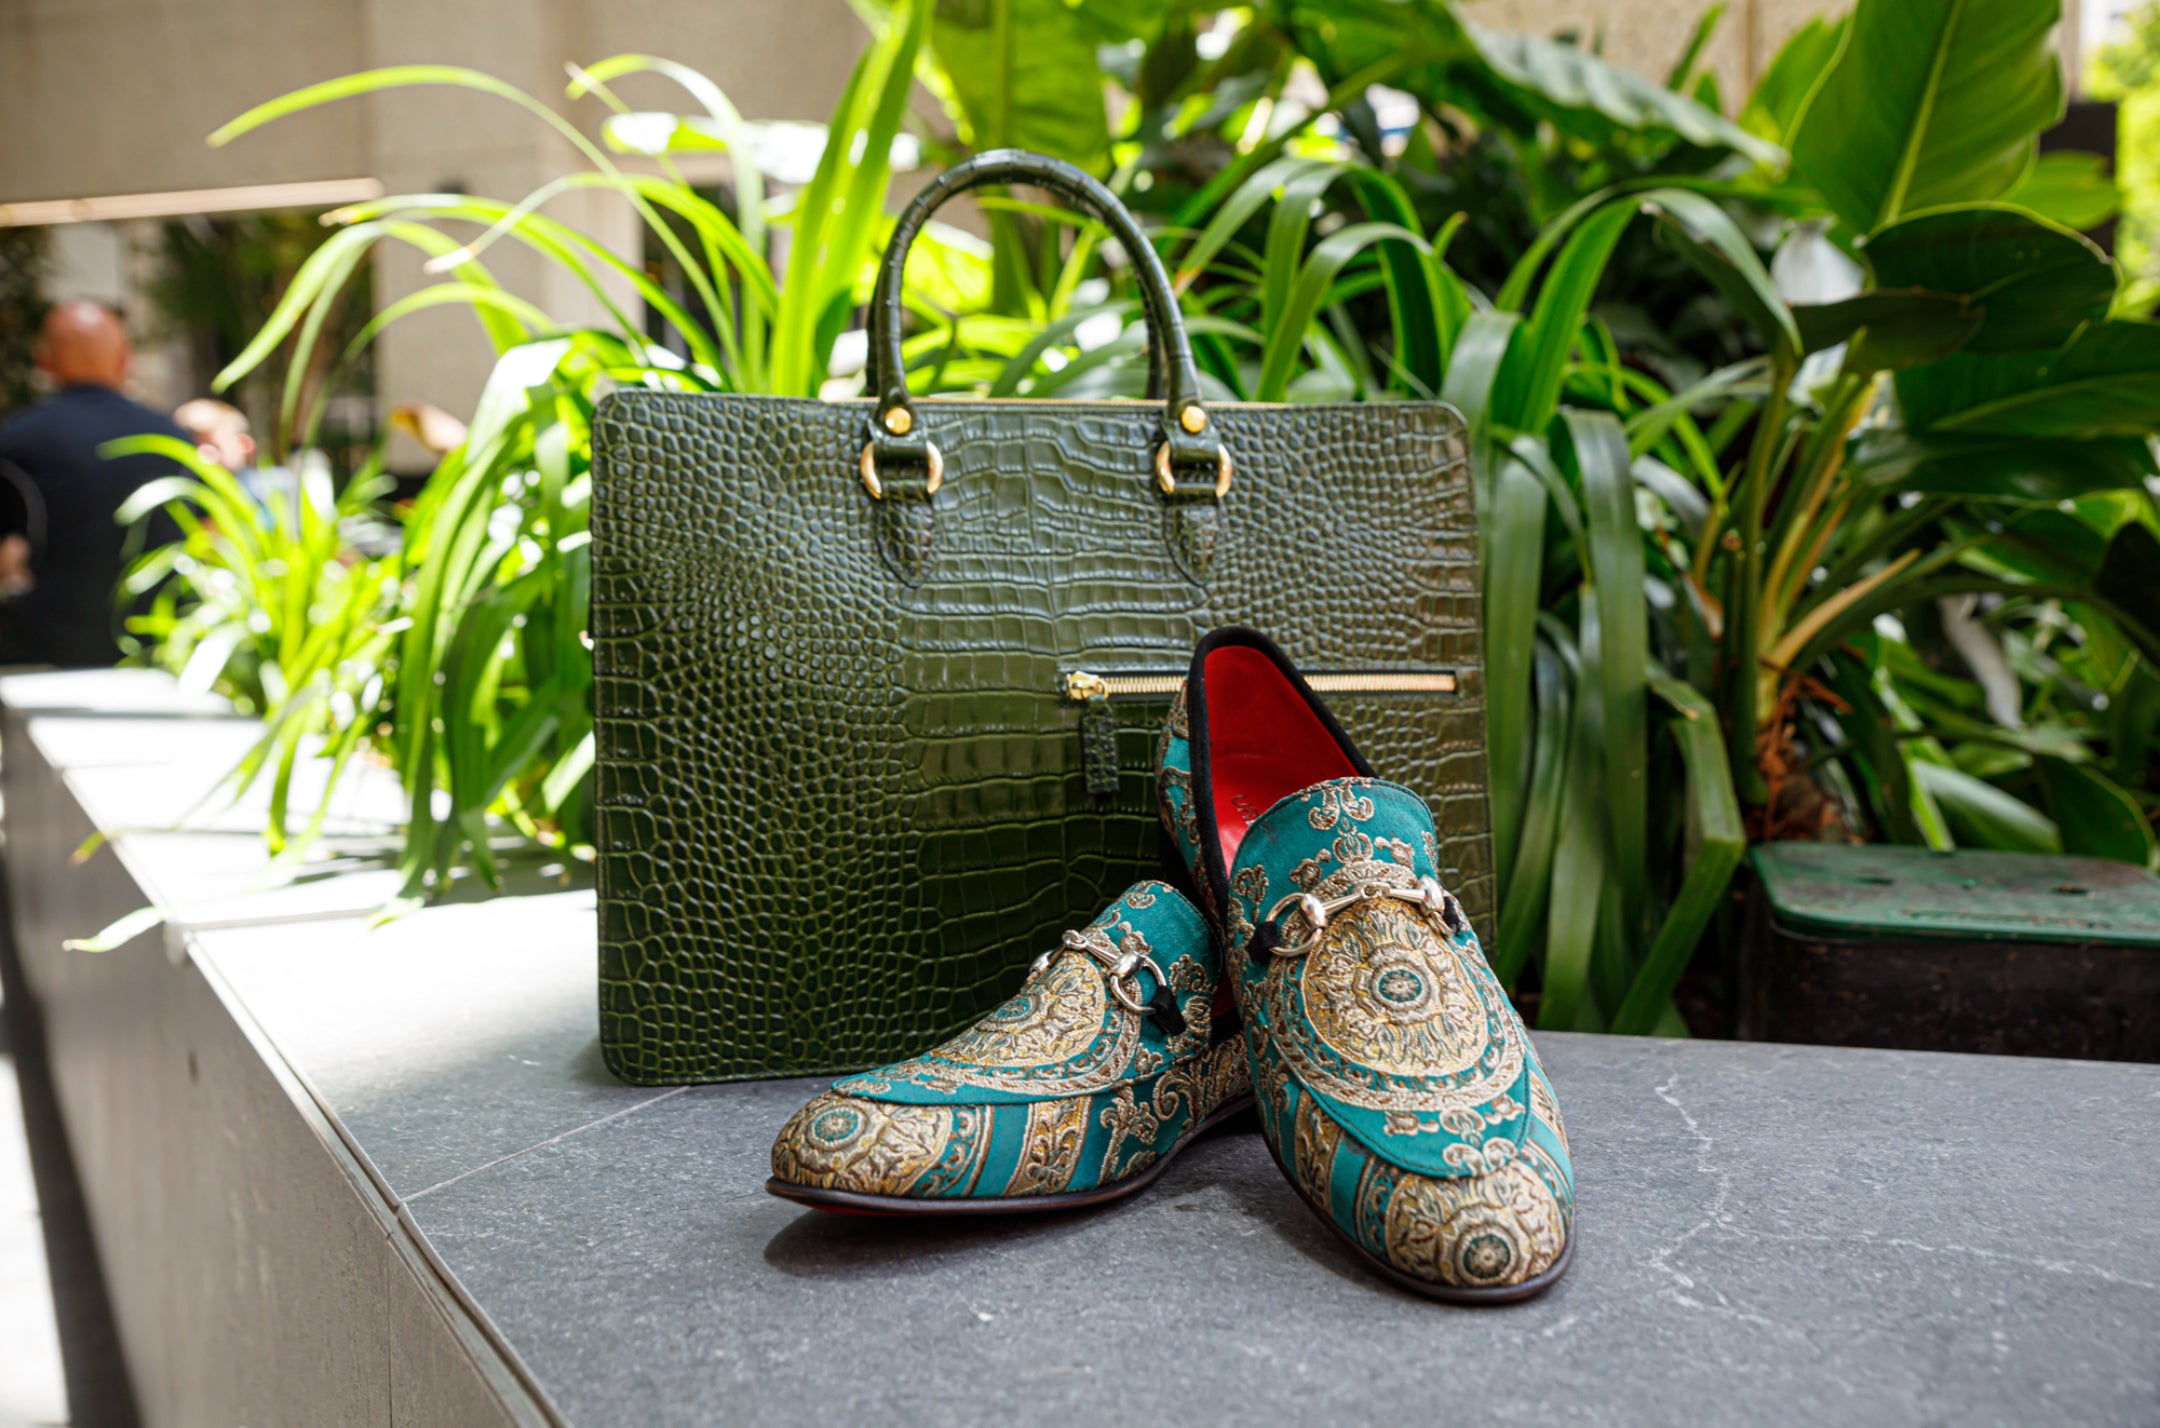 The Baroque Loafers - Green